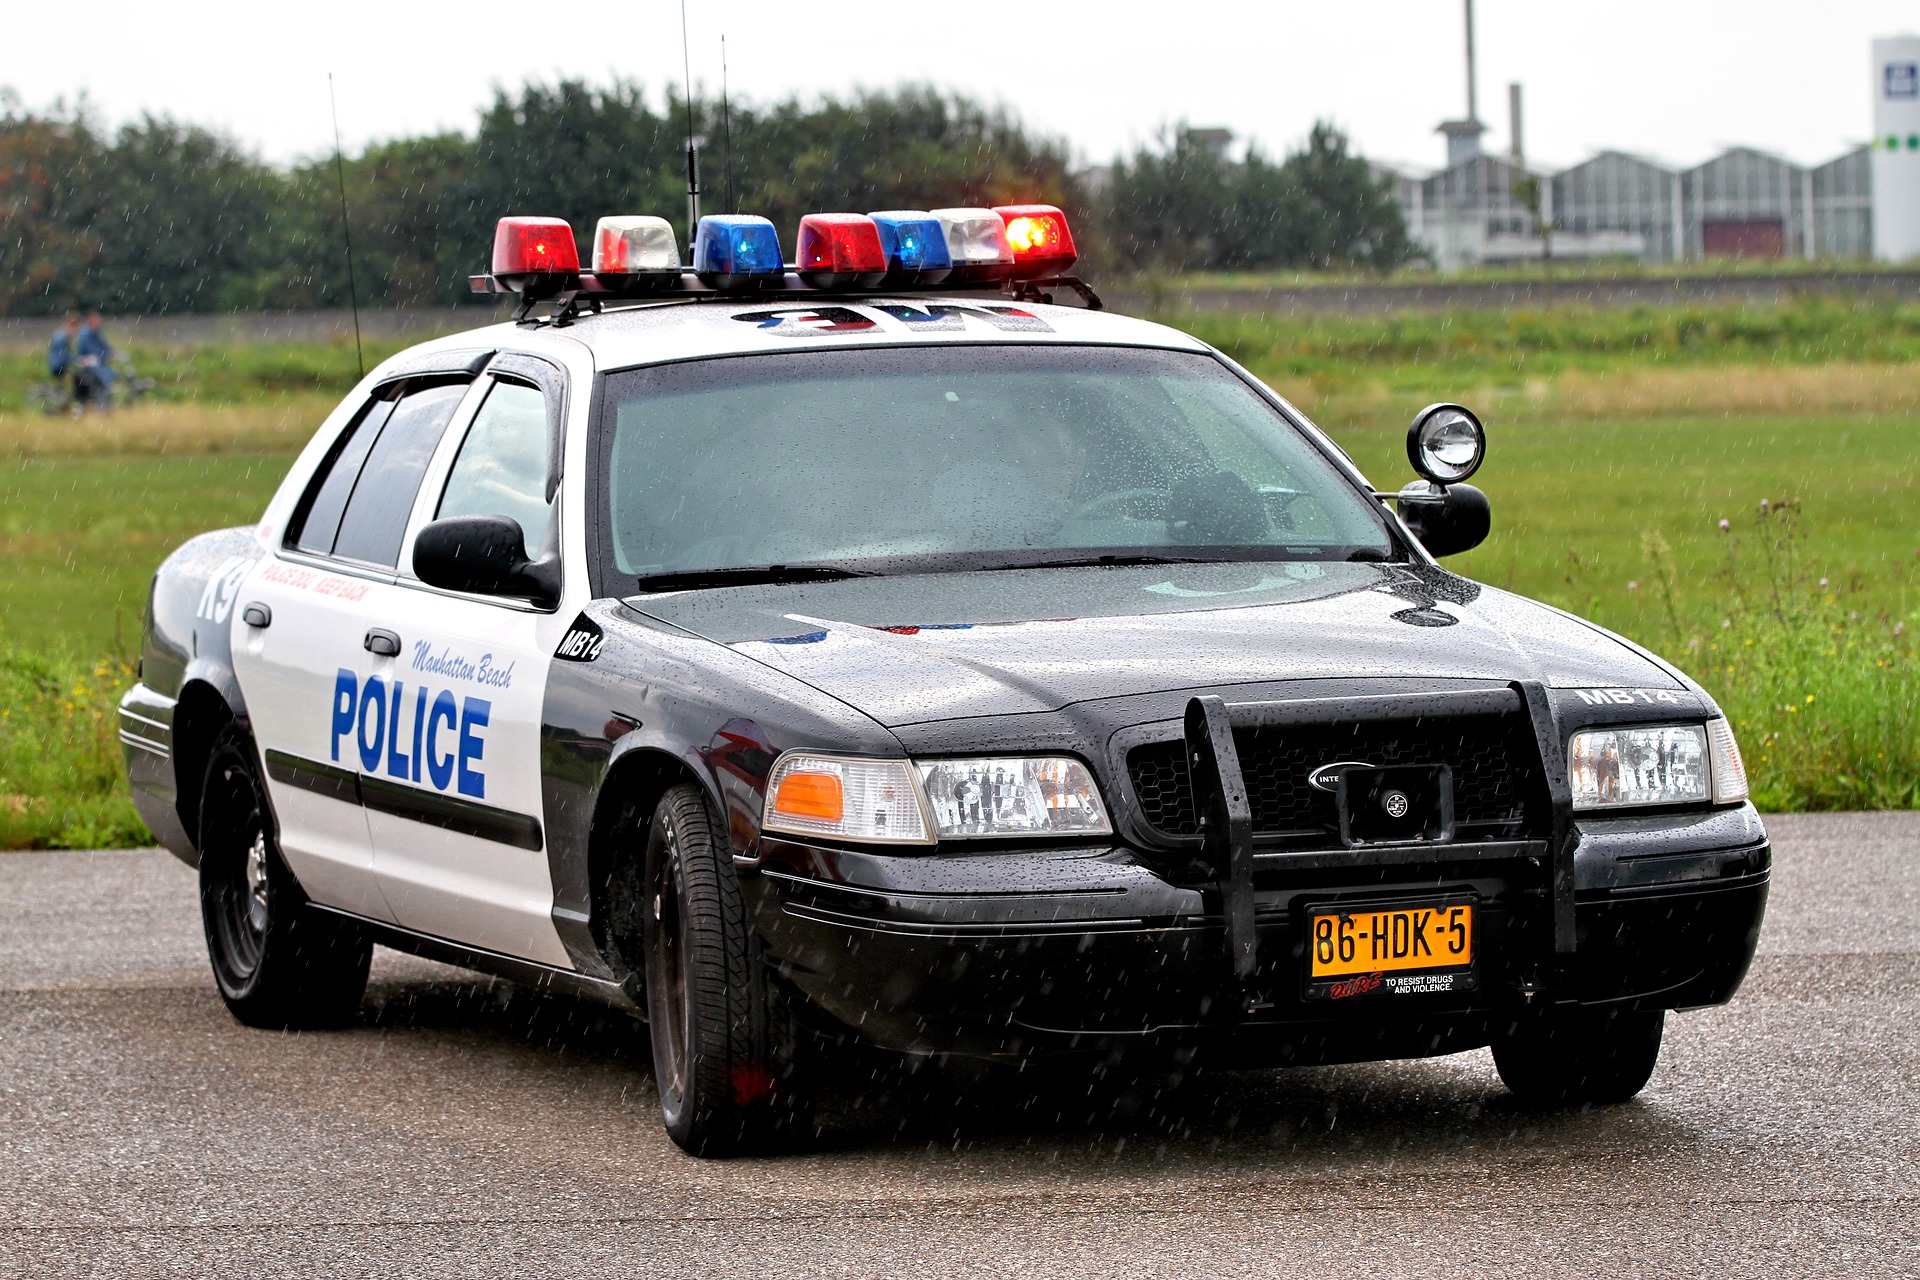 Can you sell a police car at auction?